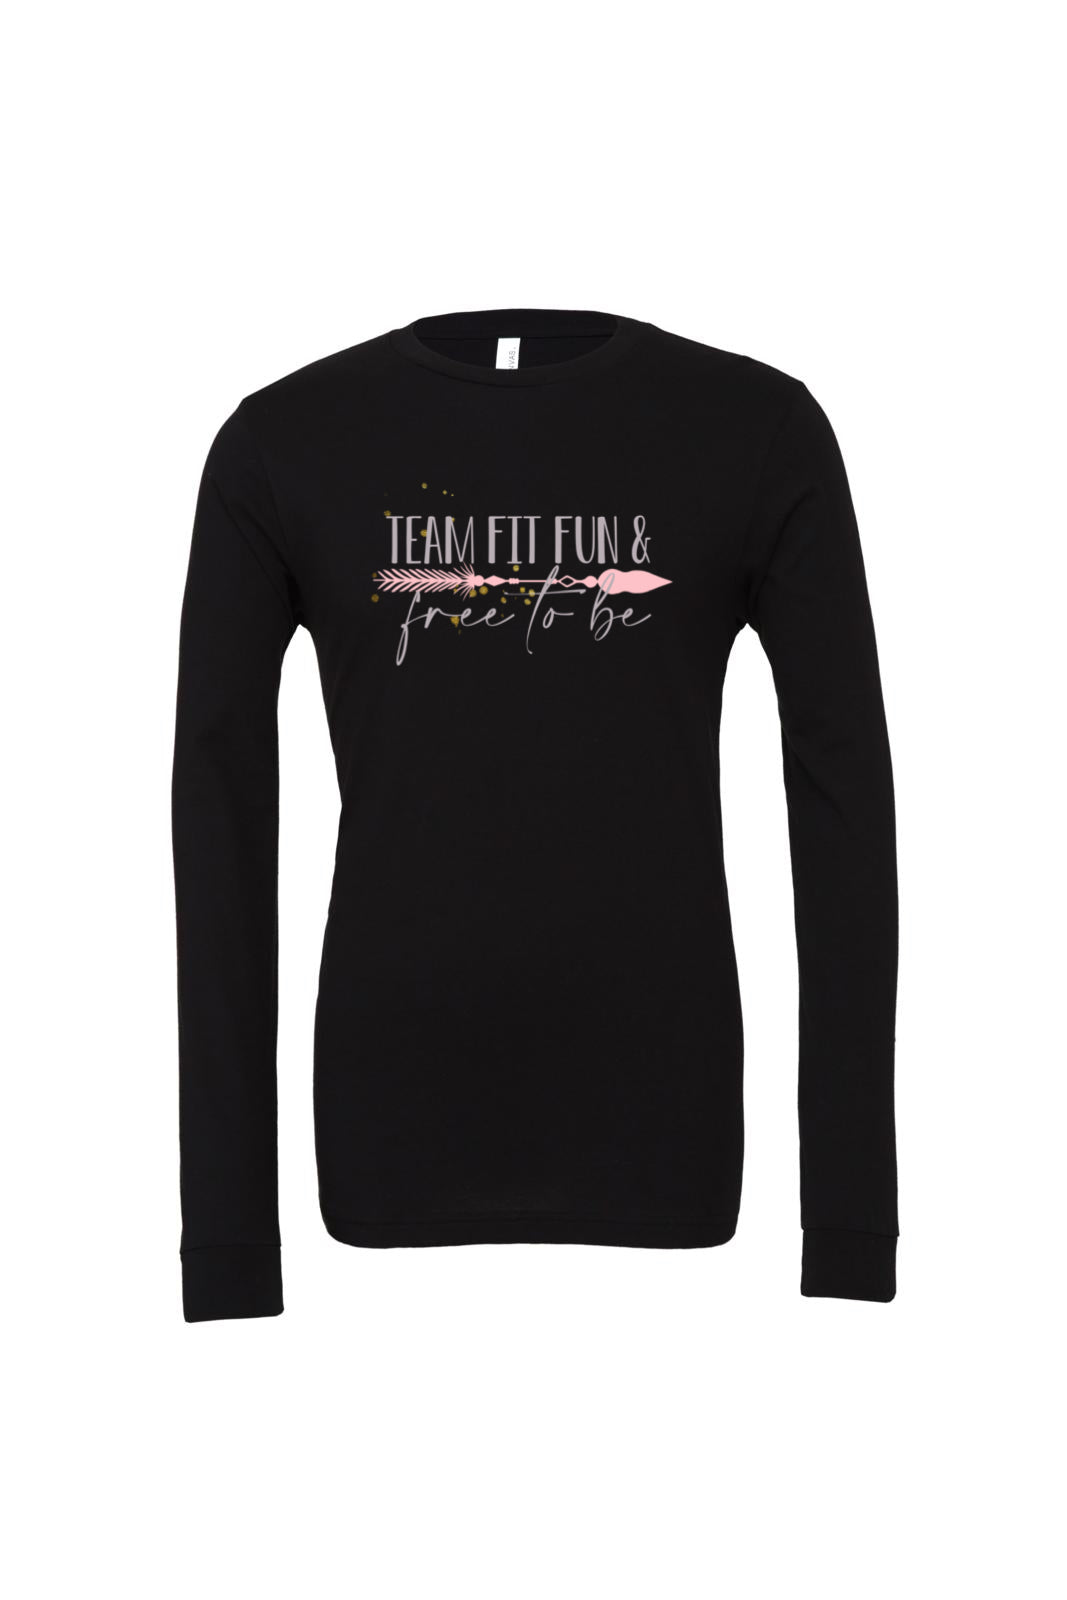 TEAM FIT FUN & FREE TO BE LONG SLEEVE TEE